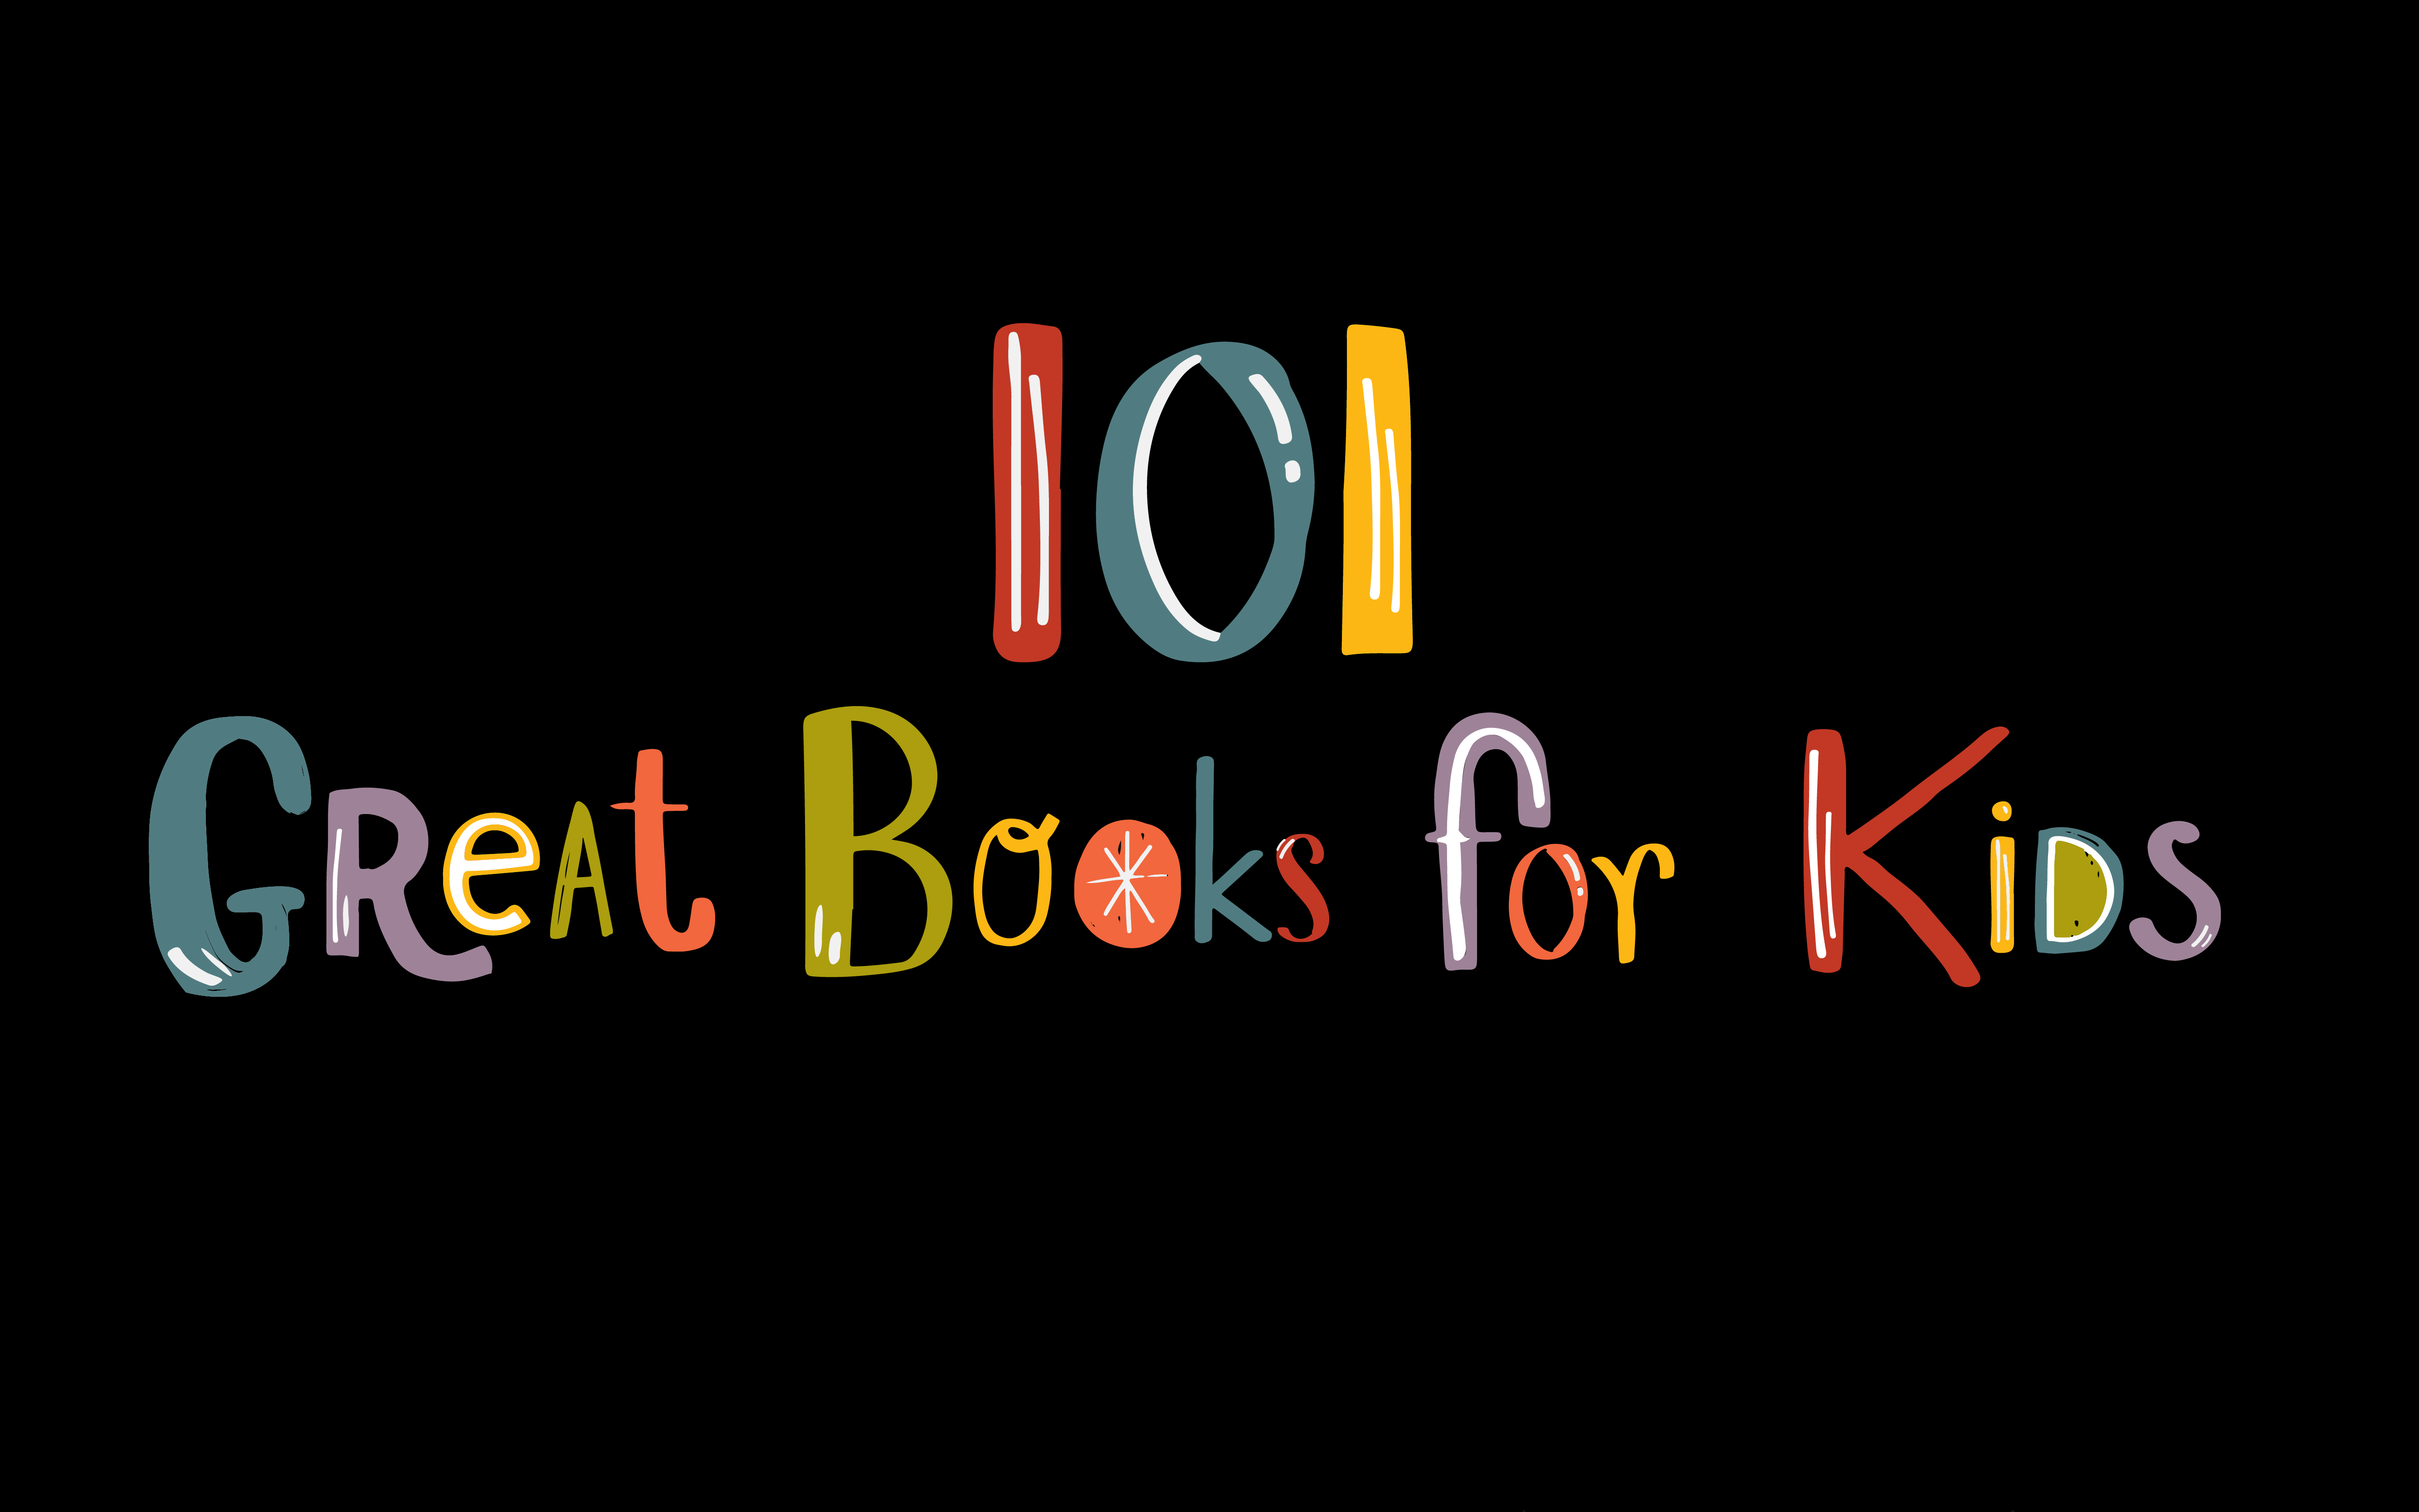 101 Great Books for Kids